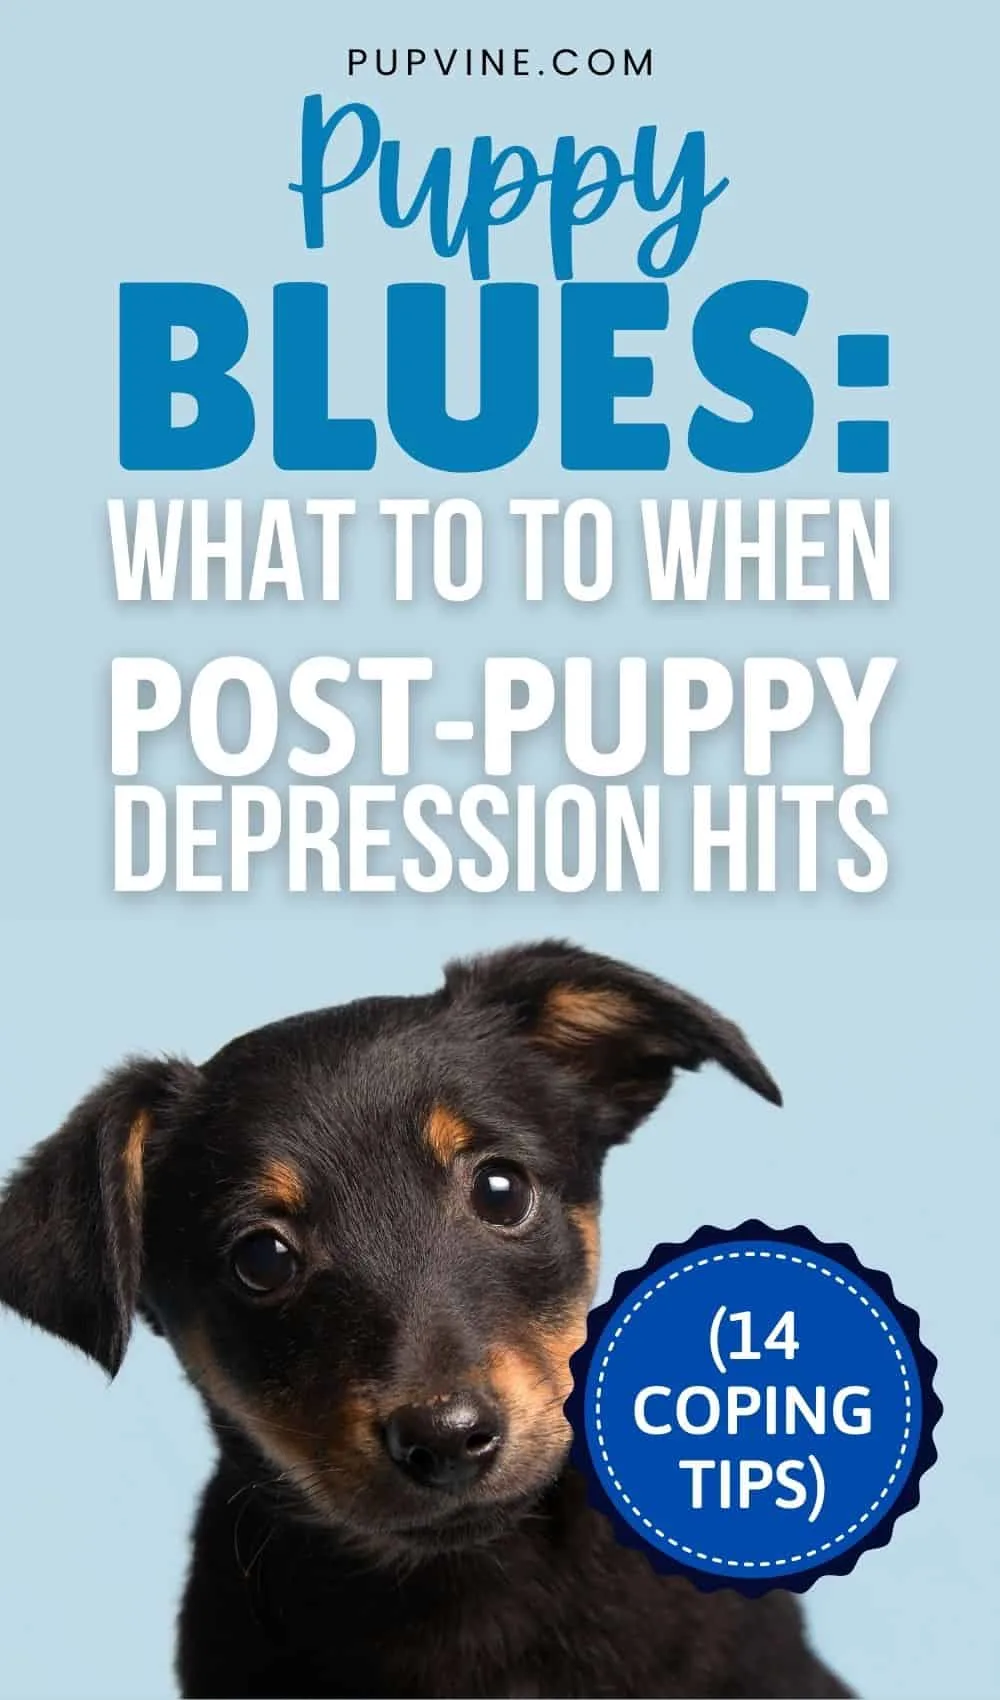 Puppy Blues: What To To When Post-Puppy Depression Hits (14 Coping Tips)